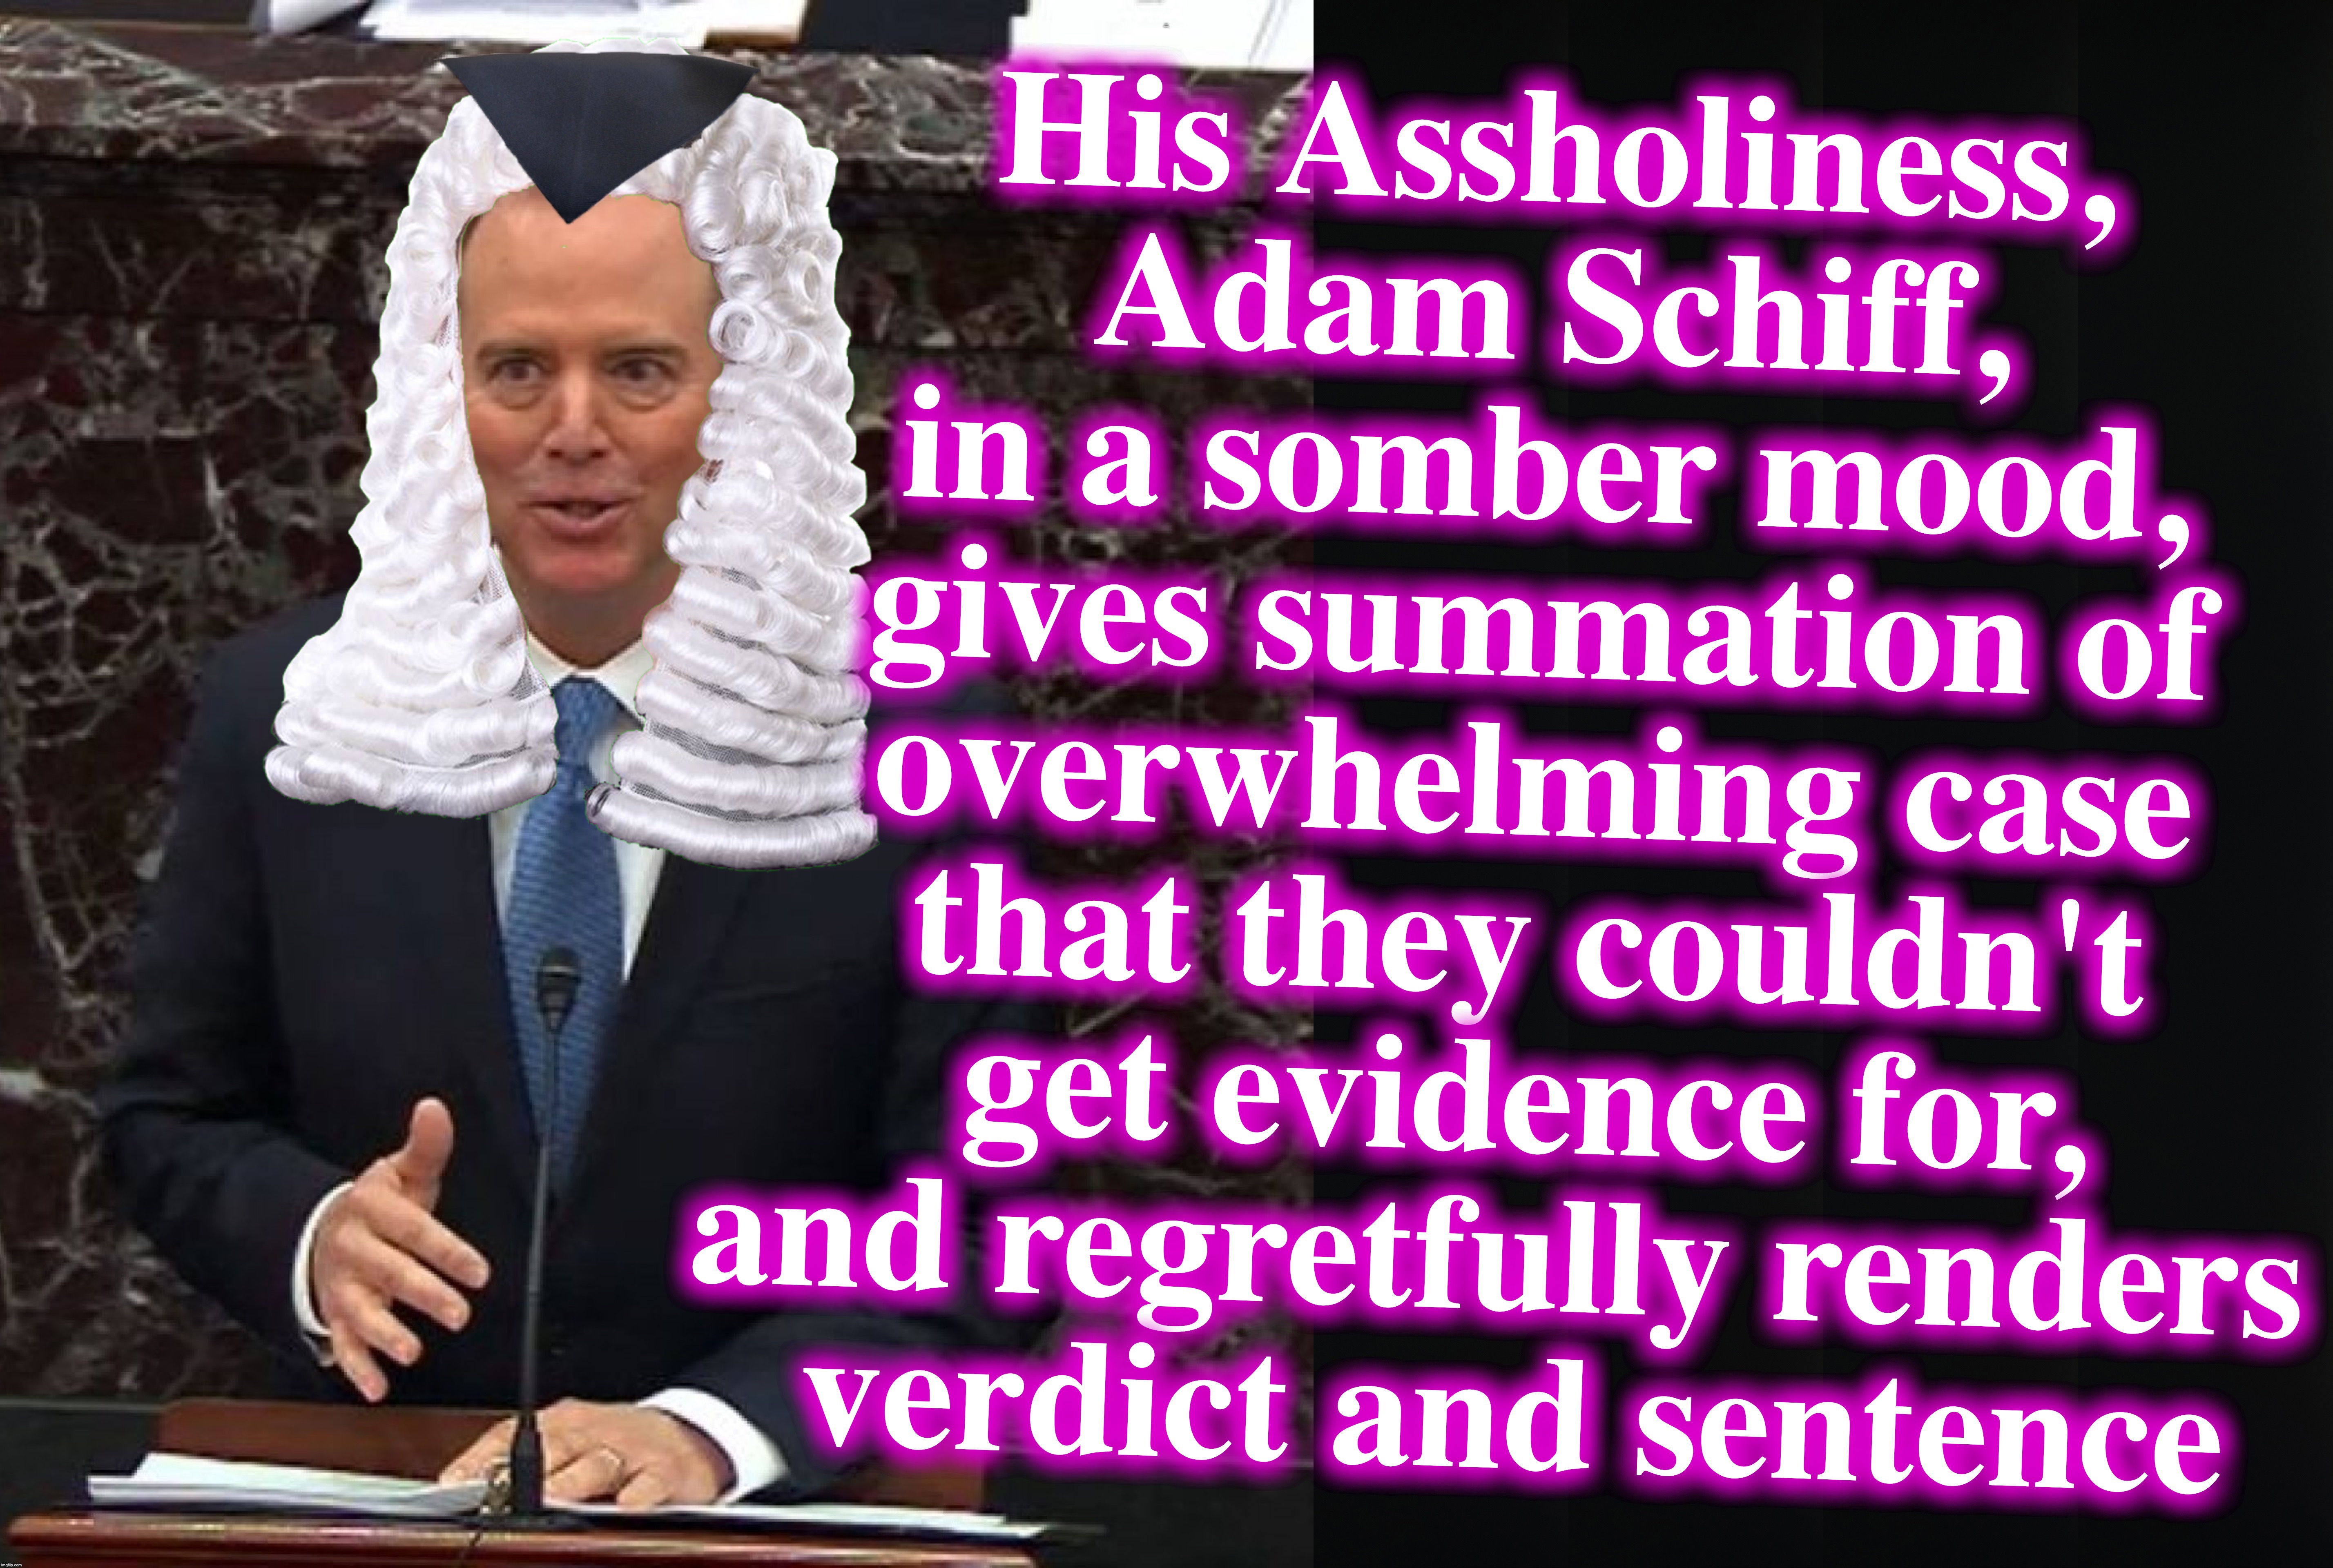 does he give him a tot of whiskey before the sentence is carried out? | SHIFF HEAD SHIFTY HIS ASSHOLINESS PENCIL NECK | image tagged in adam schiff,impeachment,the farce awakens | made w/ Imgflip meme maker